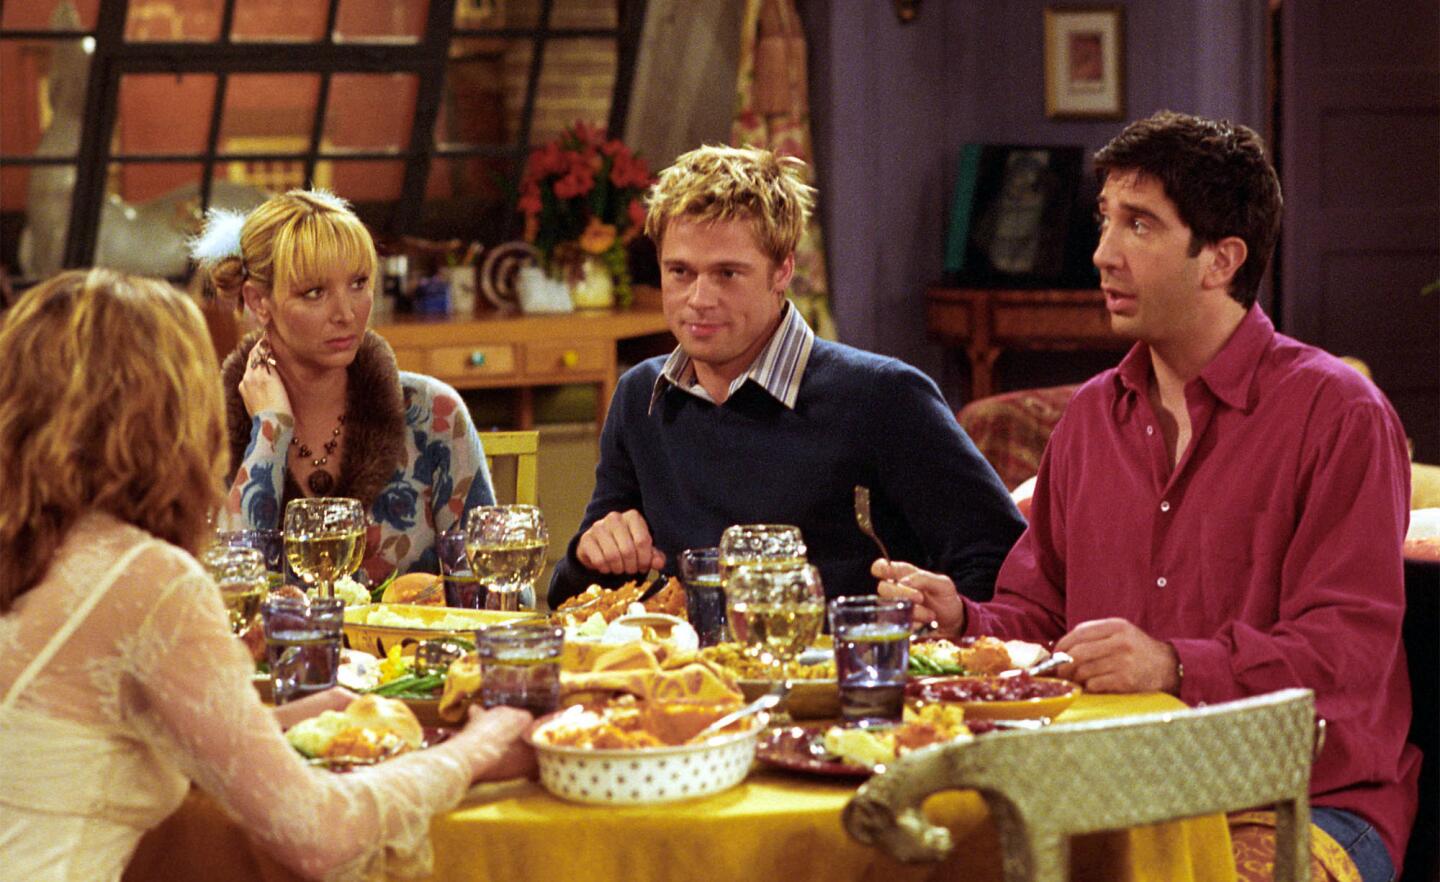 Brad Pitt, center right, joins the cast of NBC's "Friends" as a mystery guest on its Thanksgiving episode in 2001.